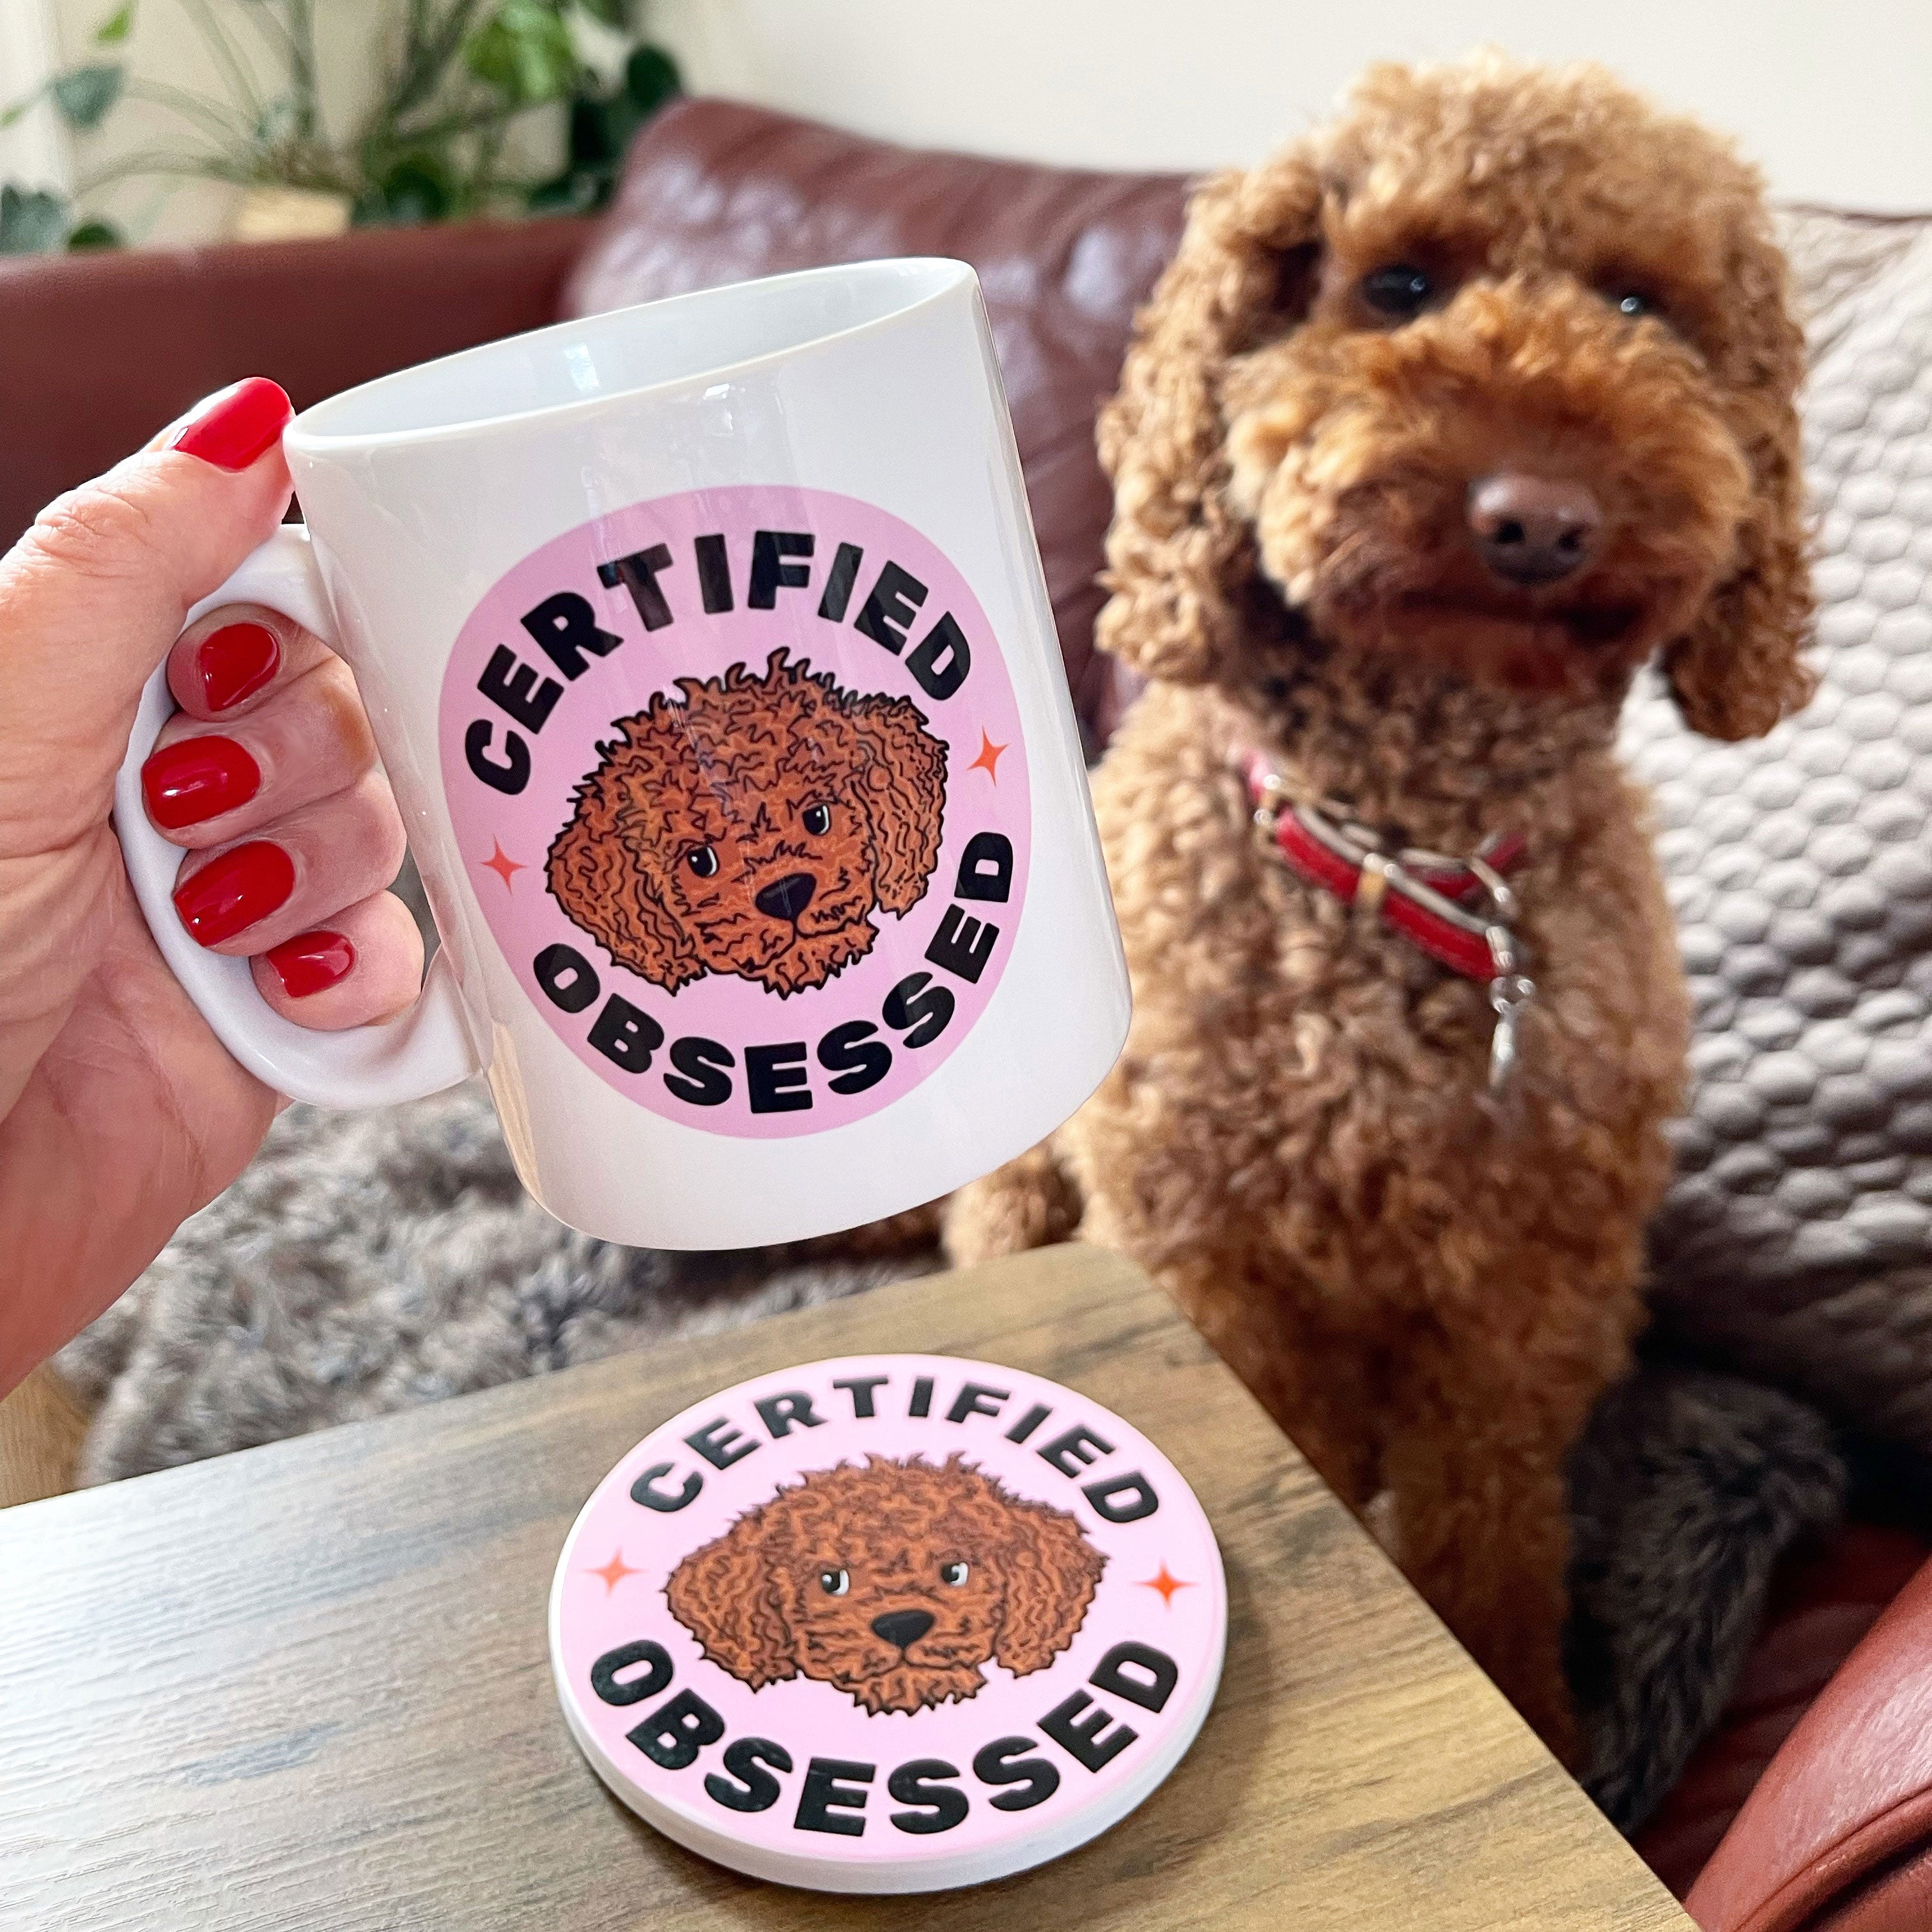 The Certified Obsessed Dog Lover Mug